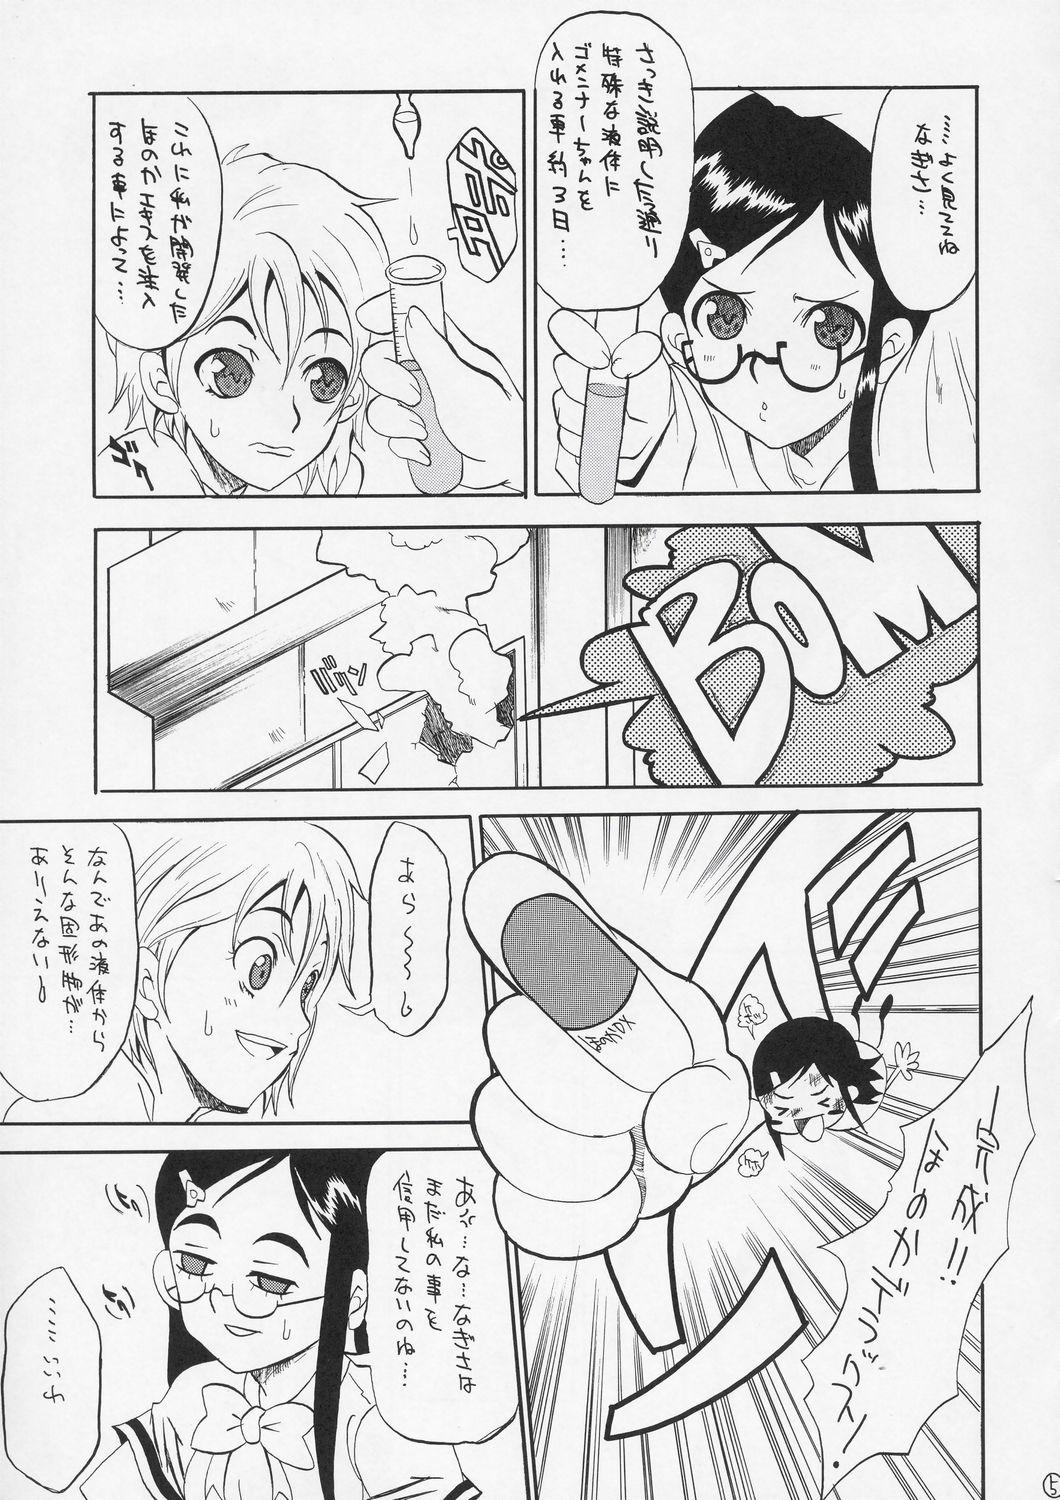 Whipping Puretty Cures - Pretty cure Teen Sex - Page 4